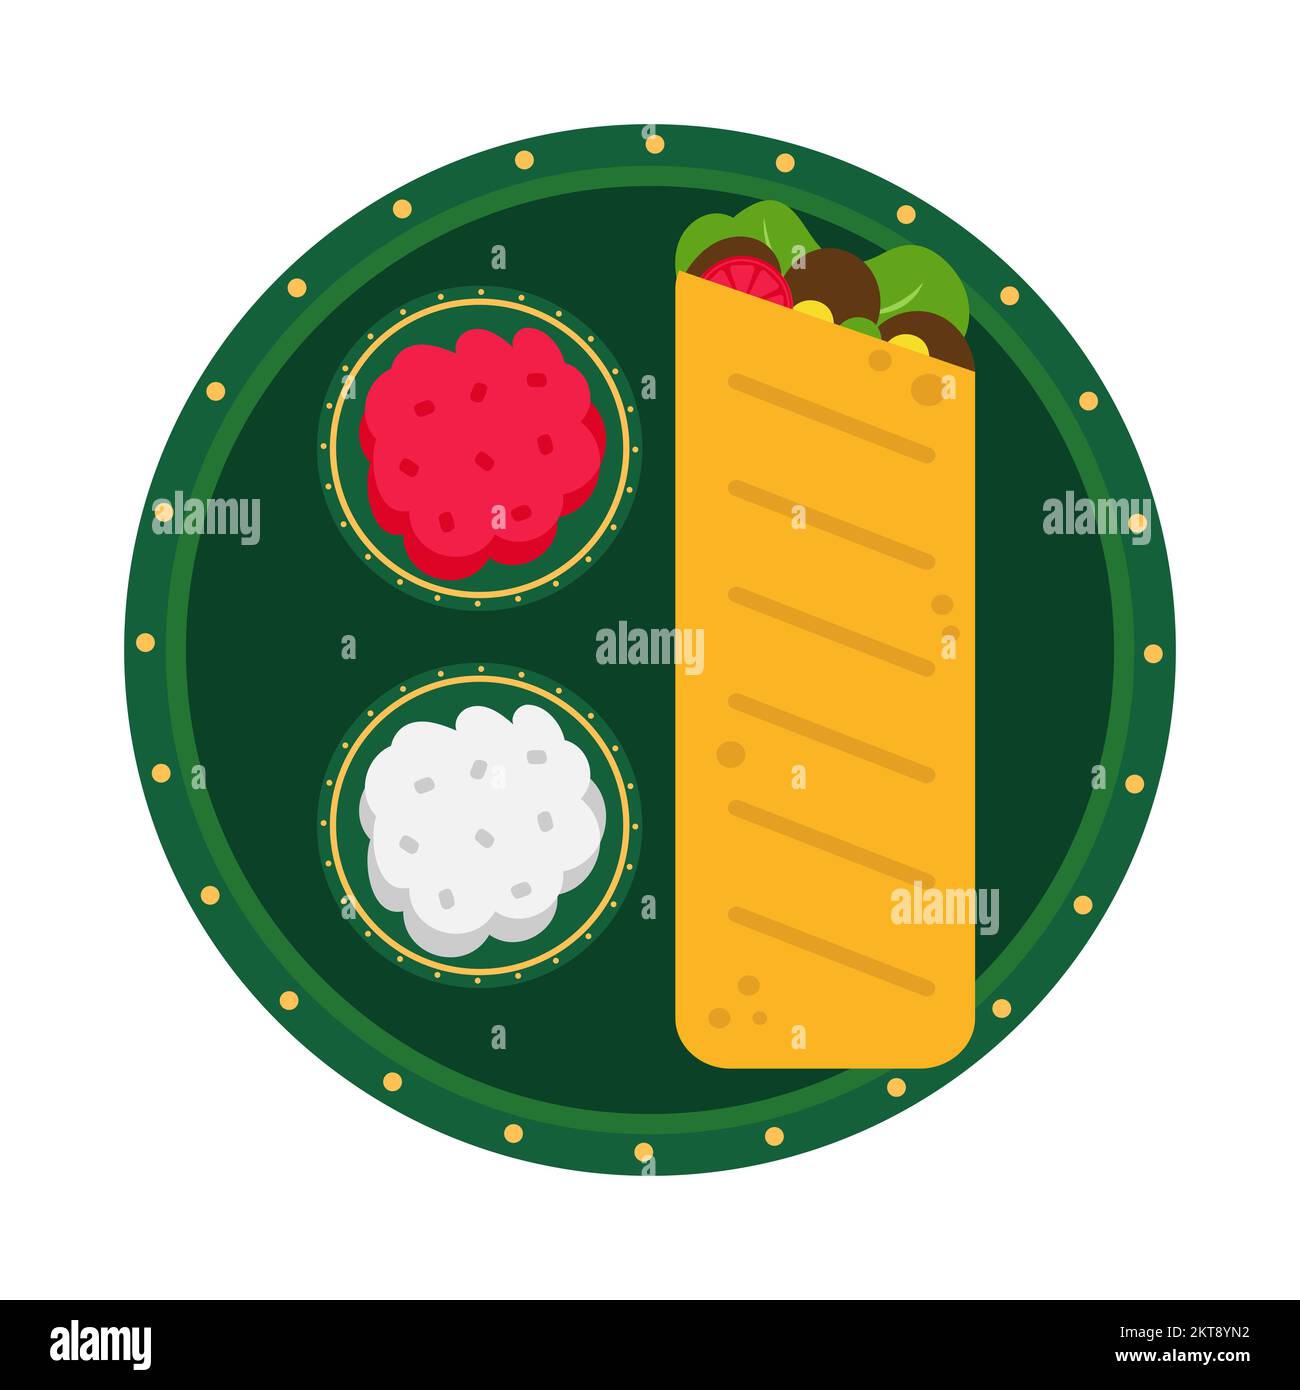 Burrito icon isolated on white background. Plate with sauces. Kebab icon. Traditional mexican dish on white background. Stock Vector